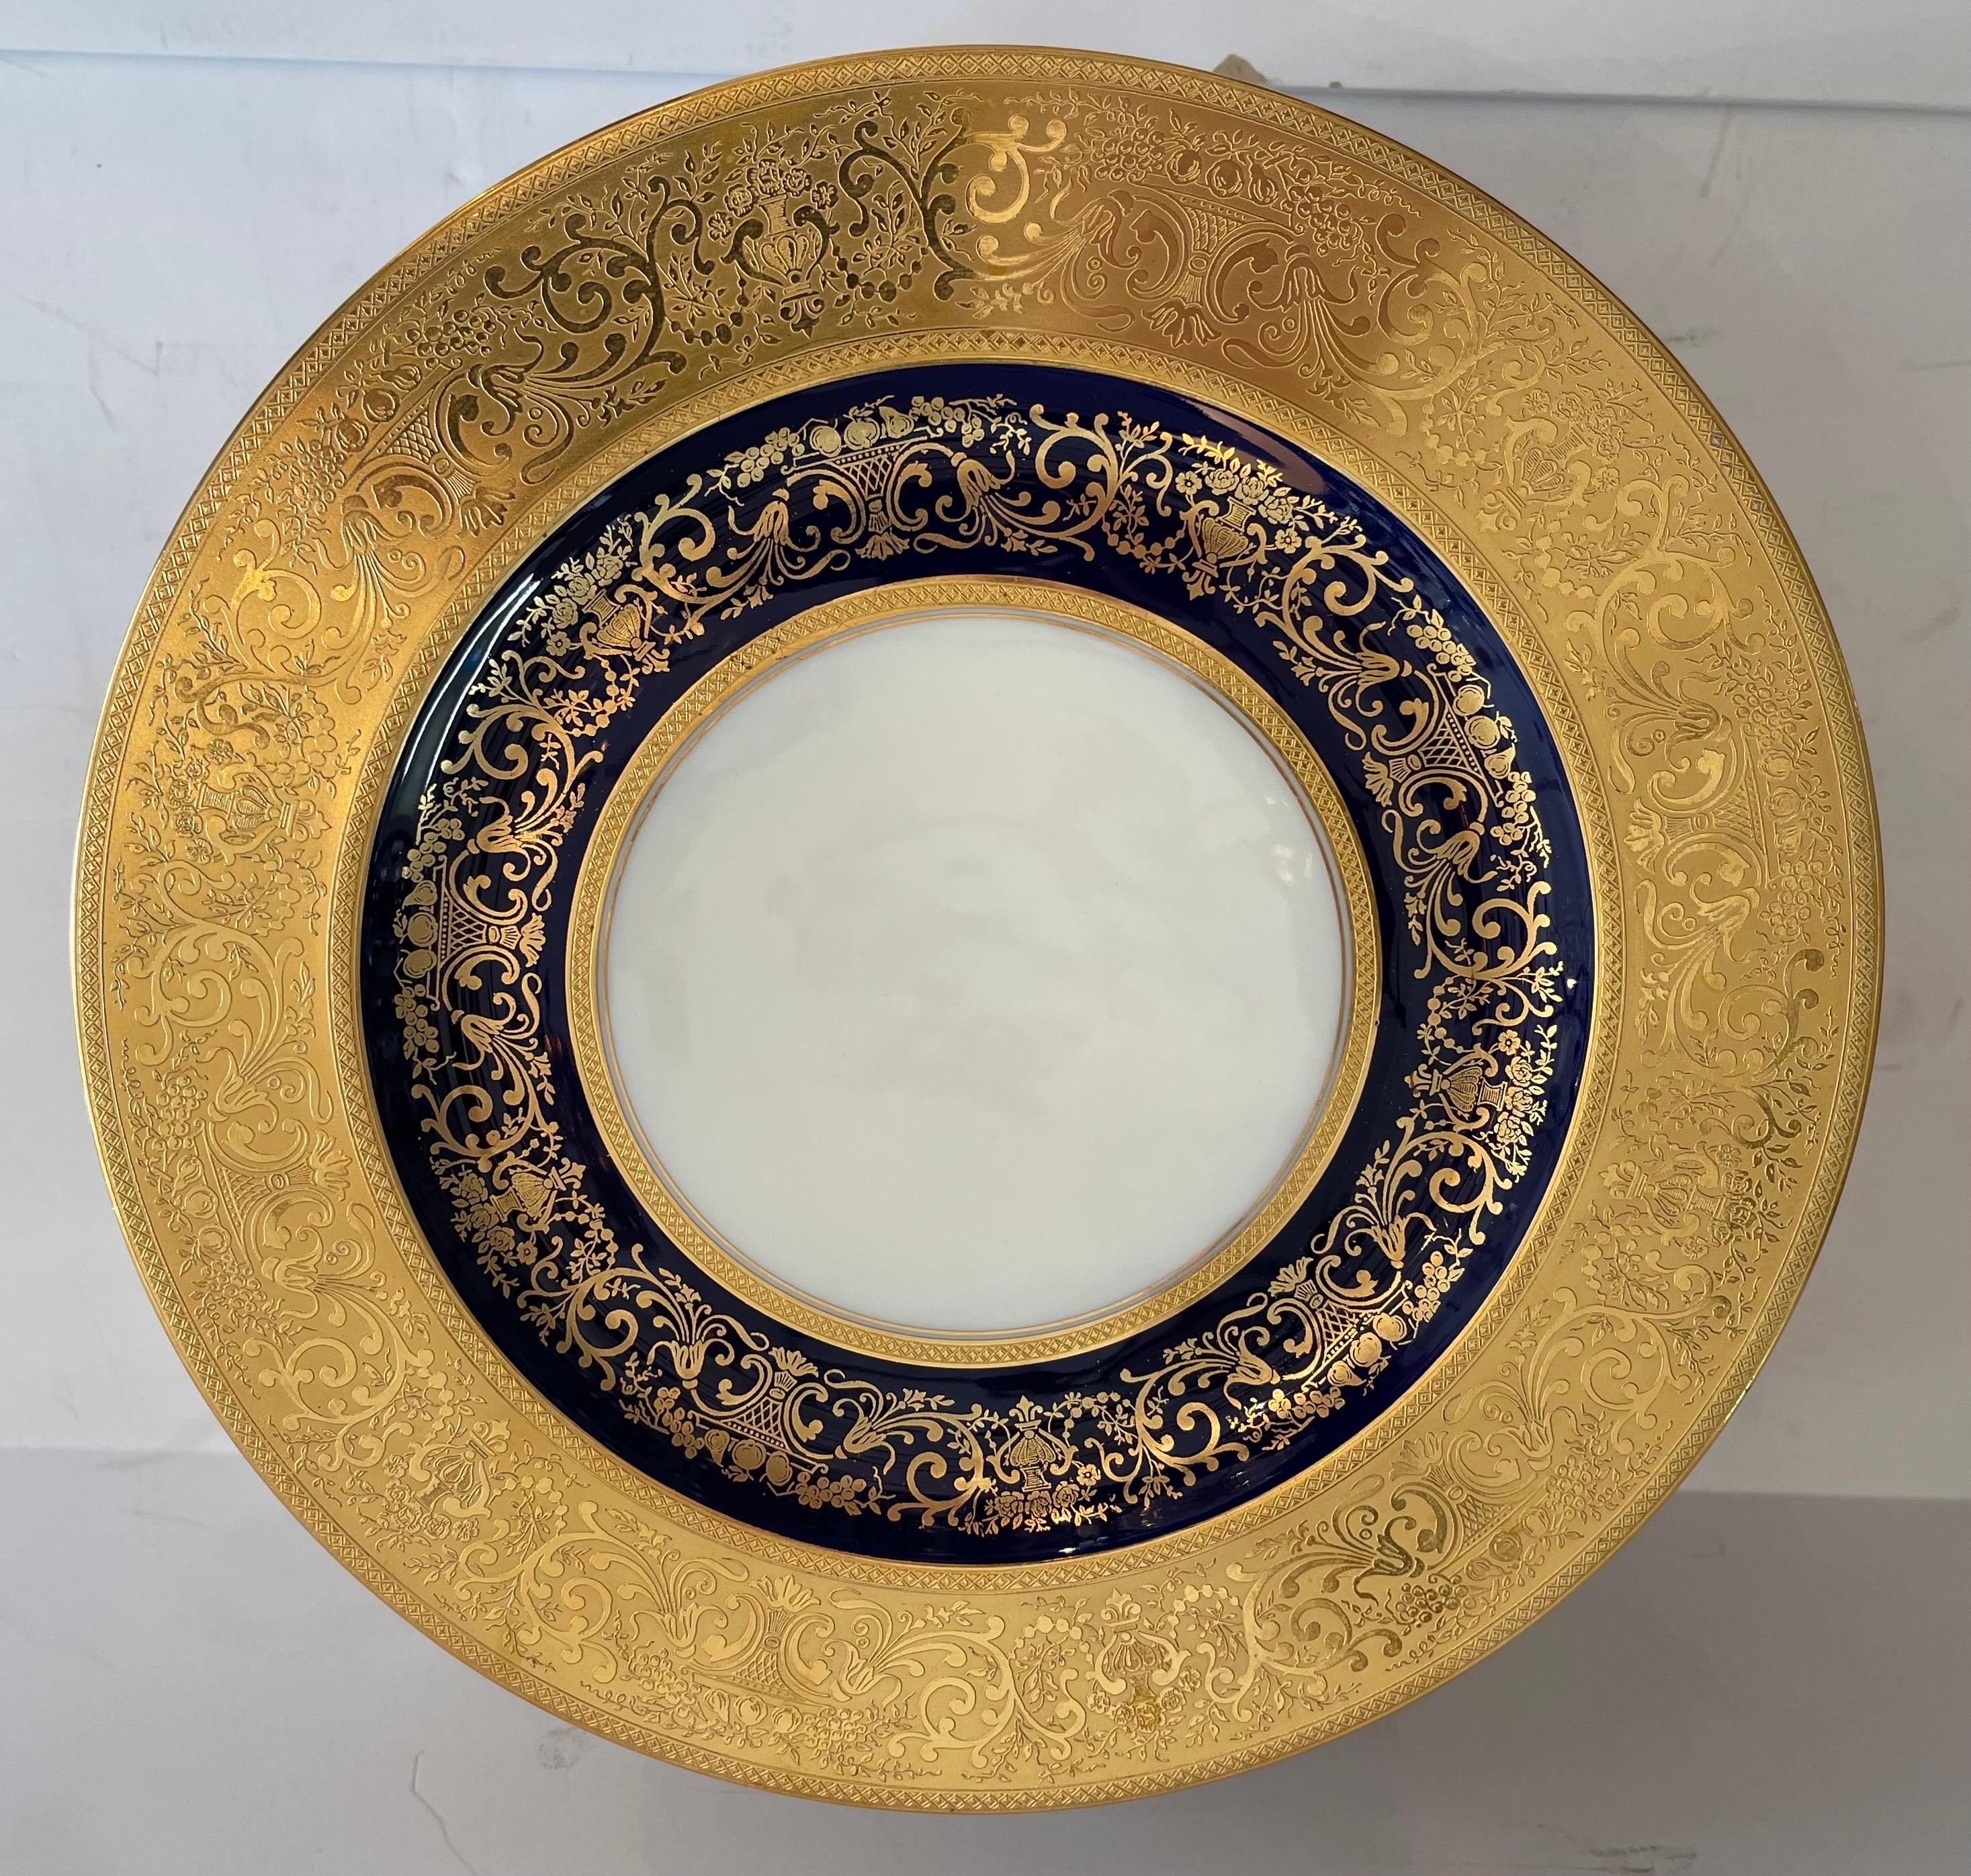 A Wonderful Black Knight set of 12 service dinner plates with raised encrusted gold over a cobalt blue interior band.